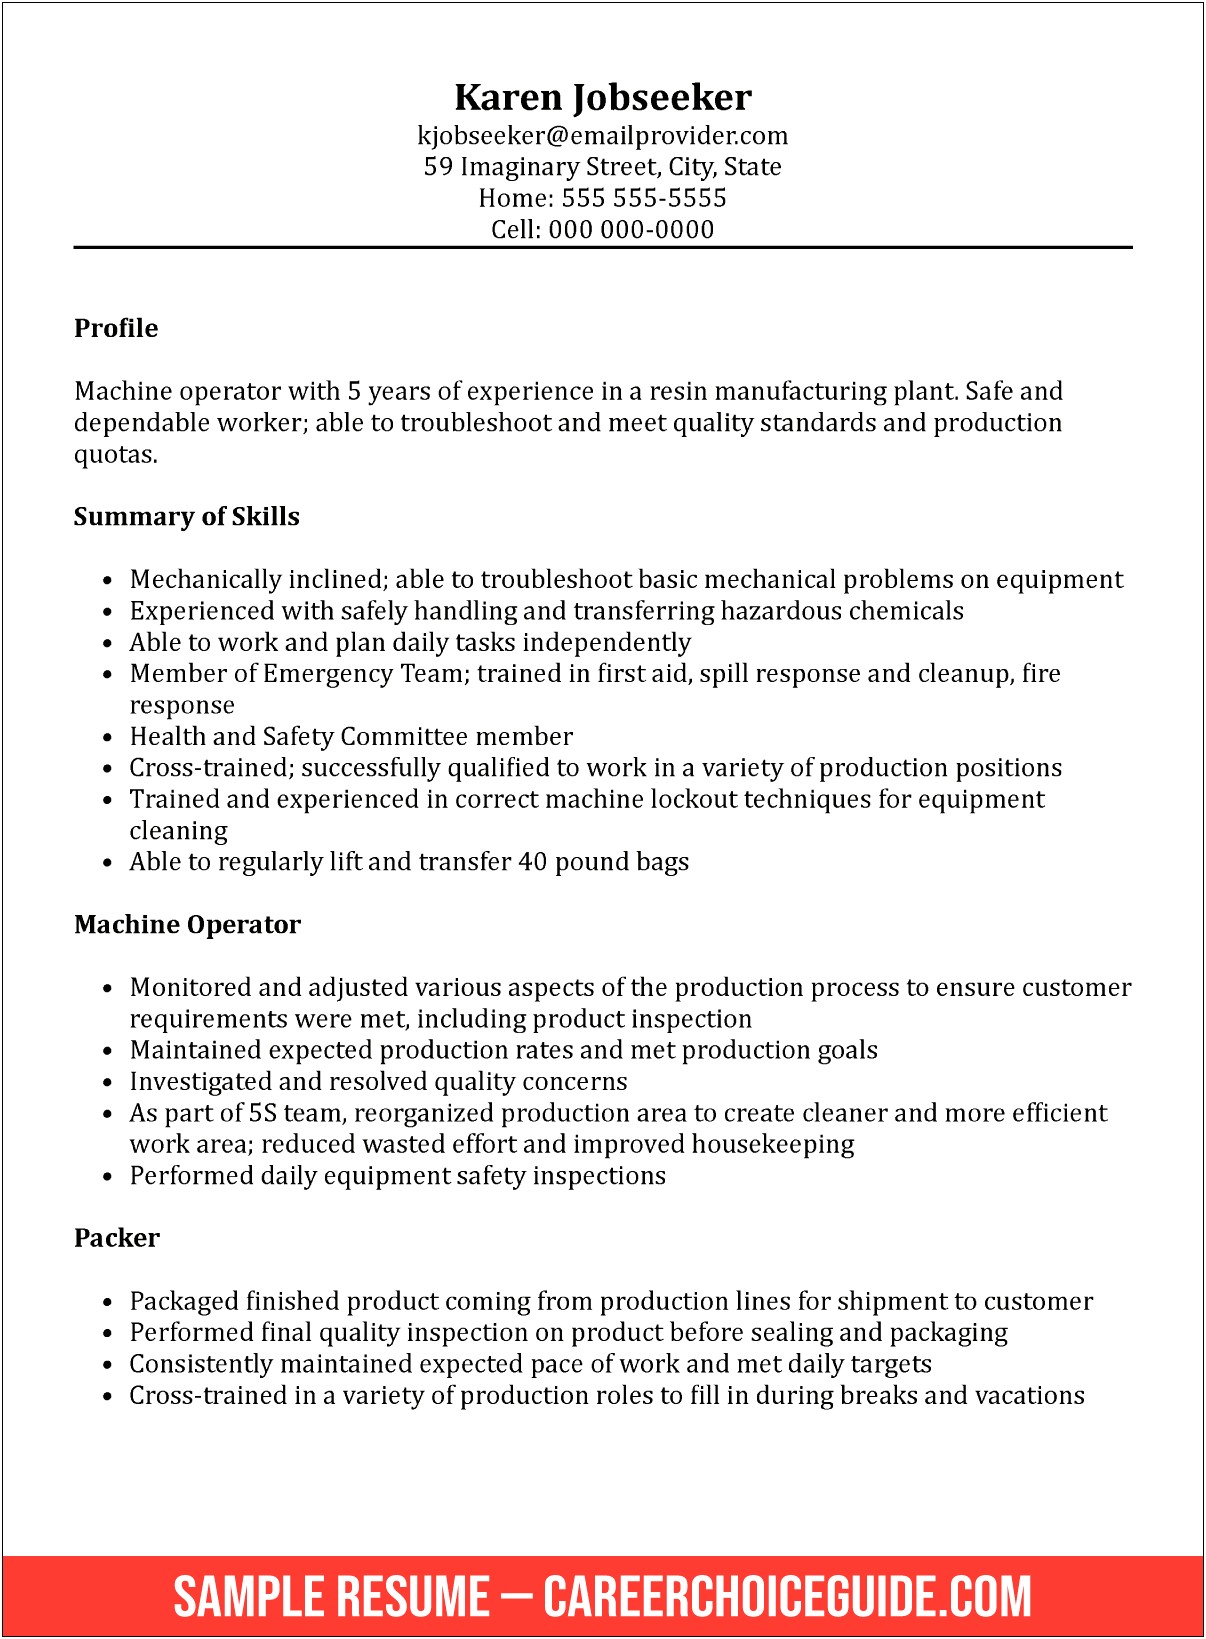 Skills And Abilites For Resume